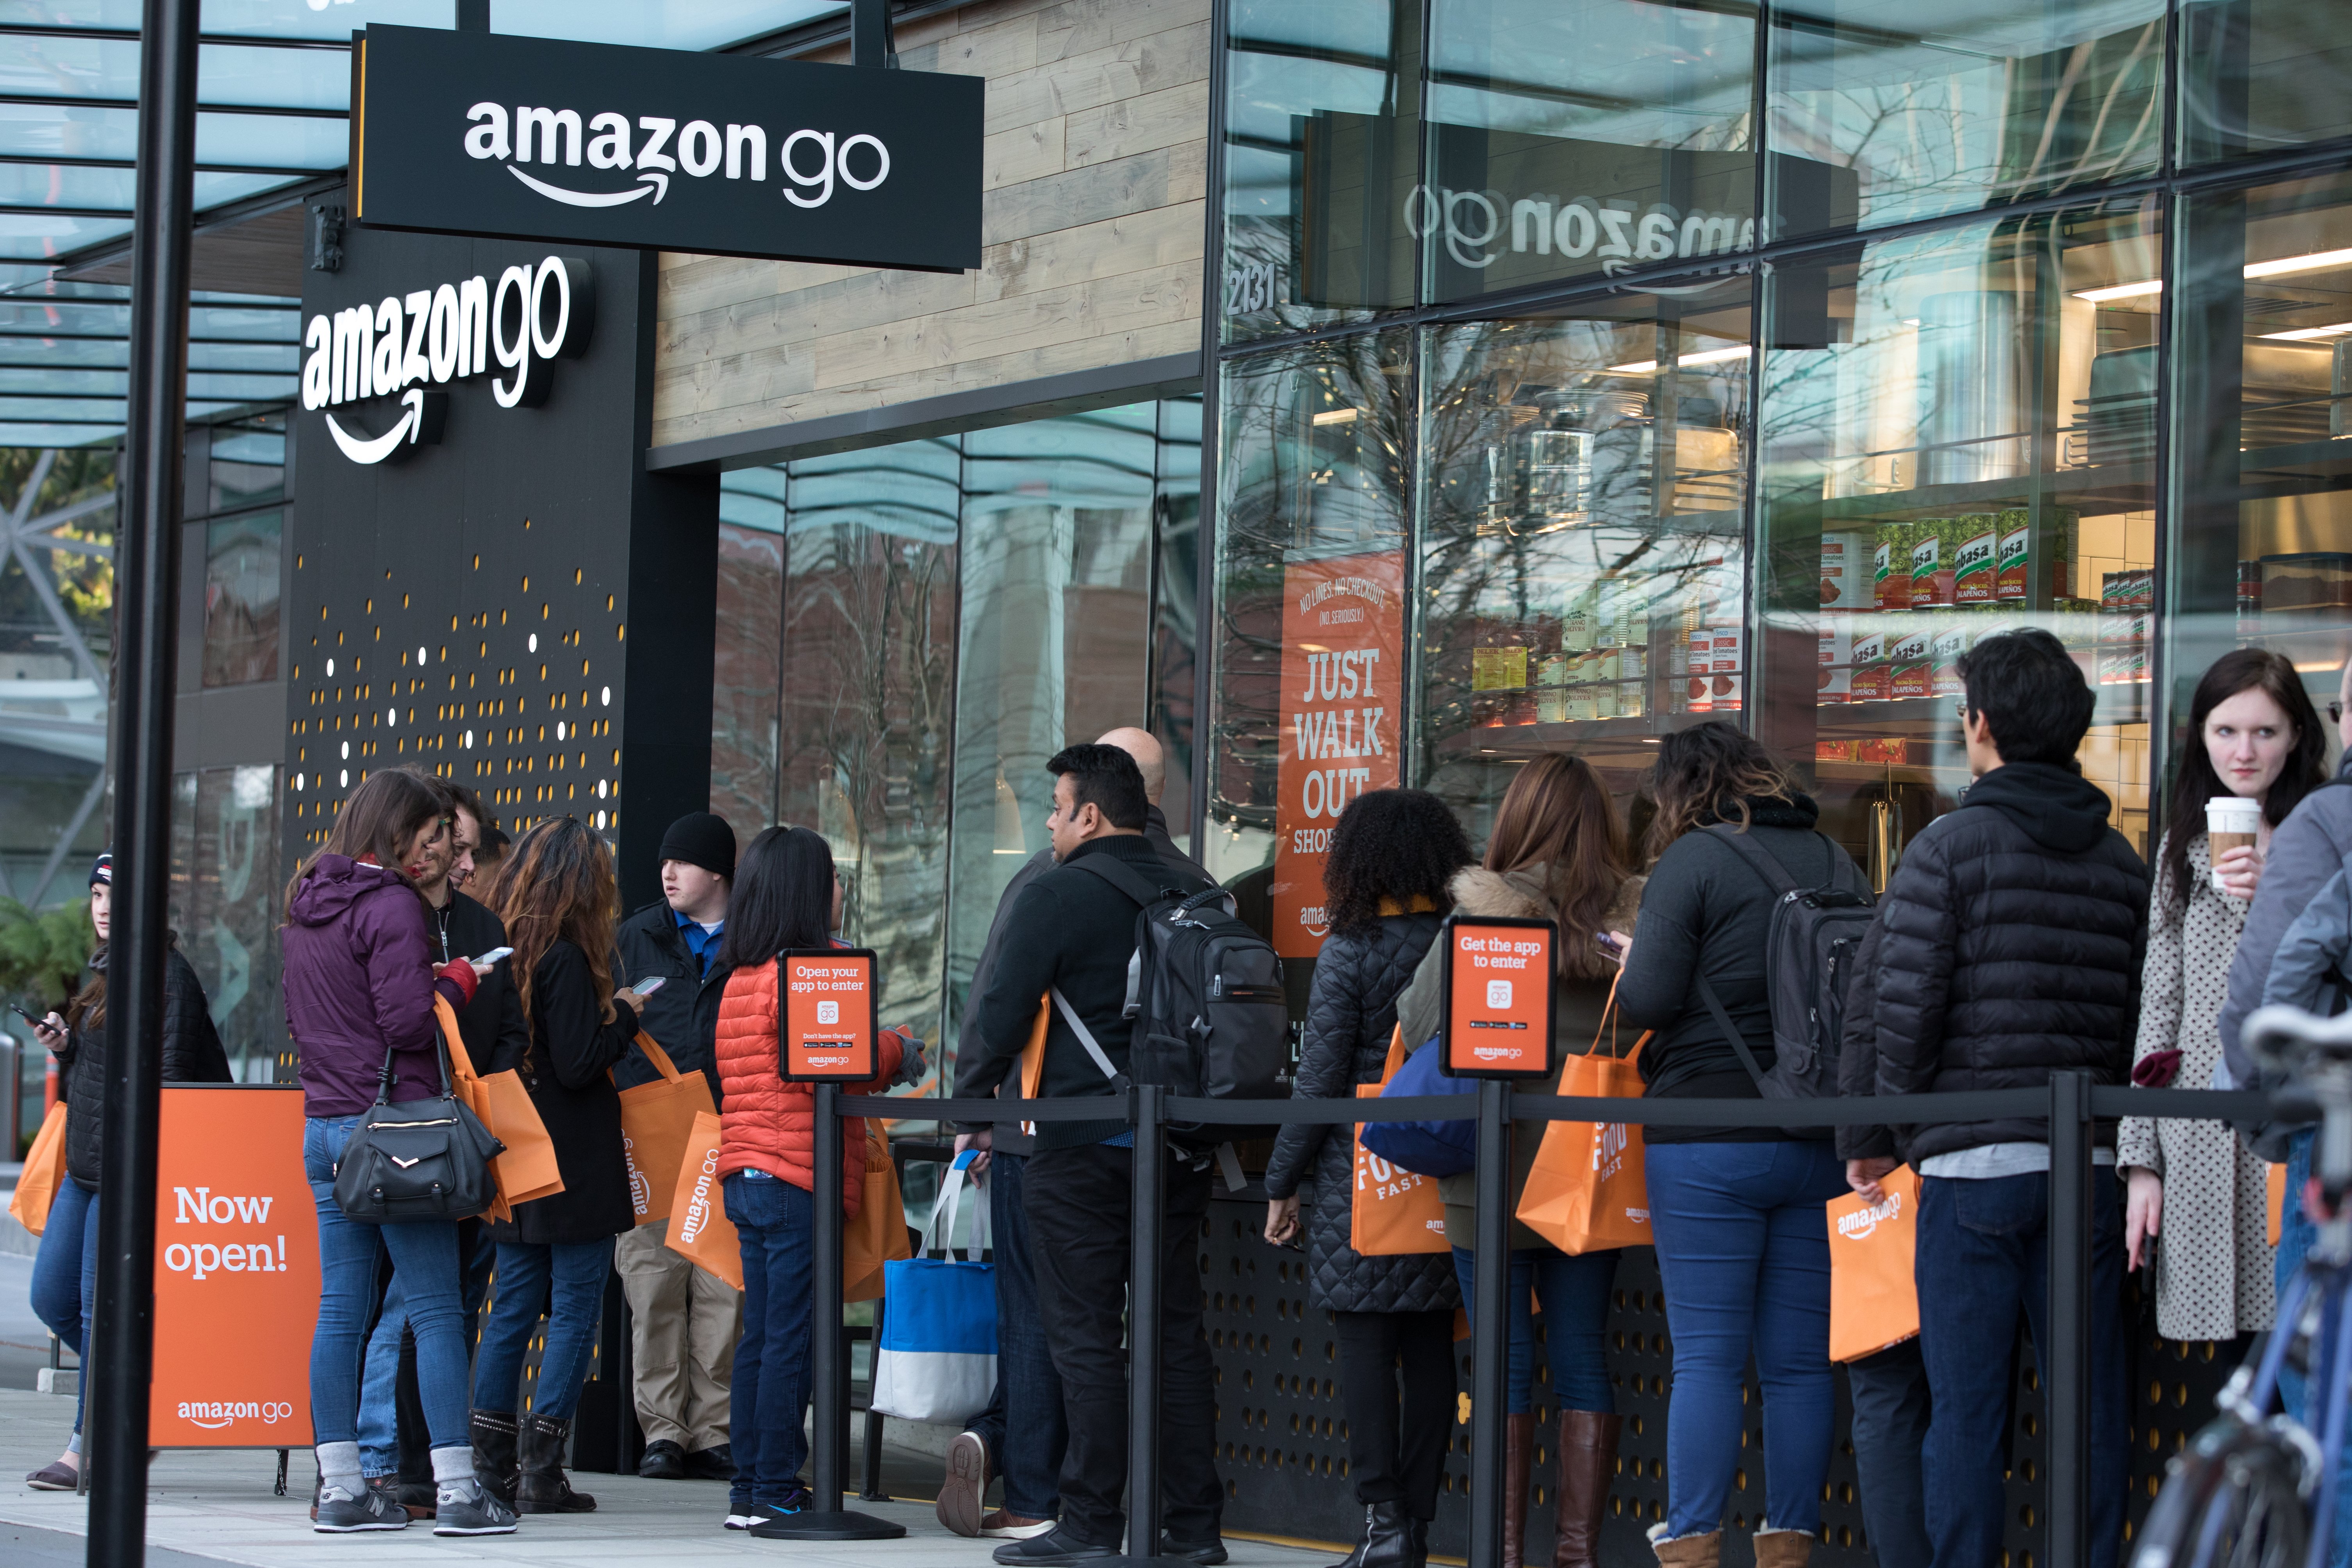 Labor, Security, and Discrimination Concerns Follow Amazon's Cashierless Grocery Store